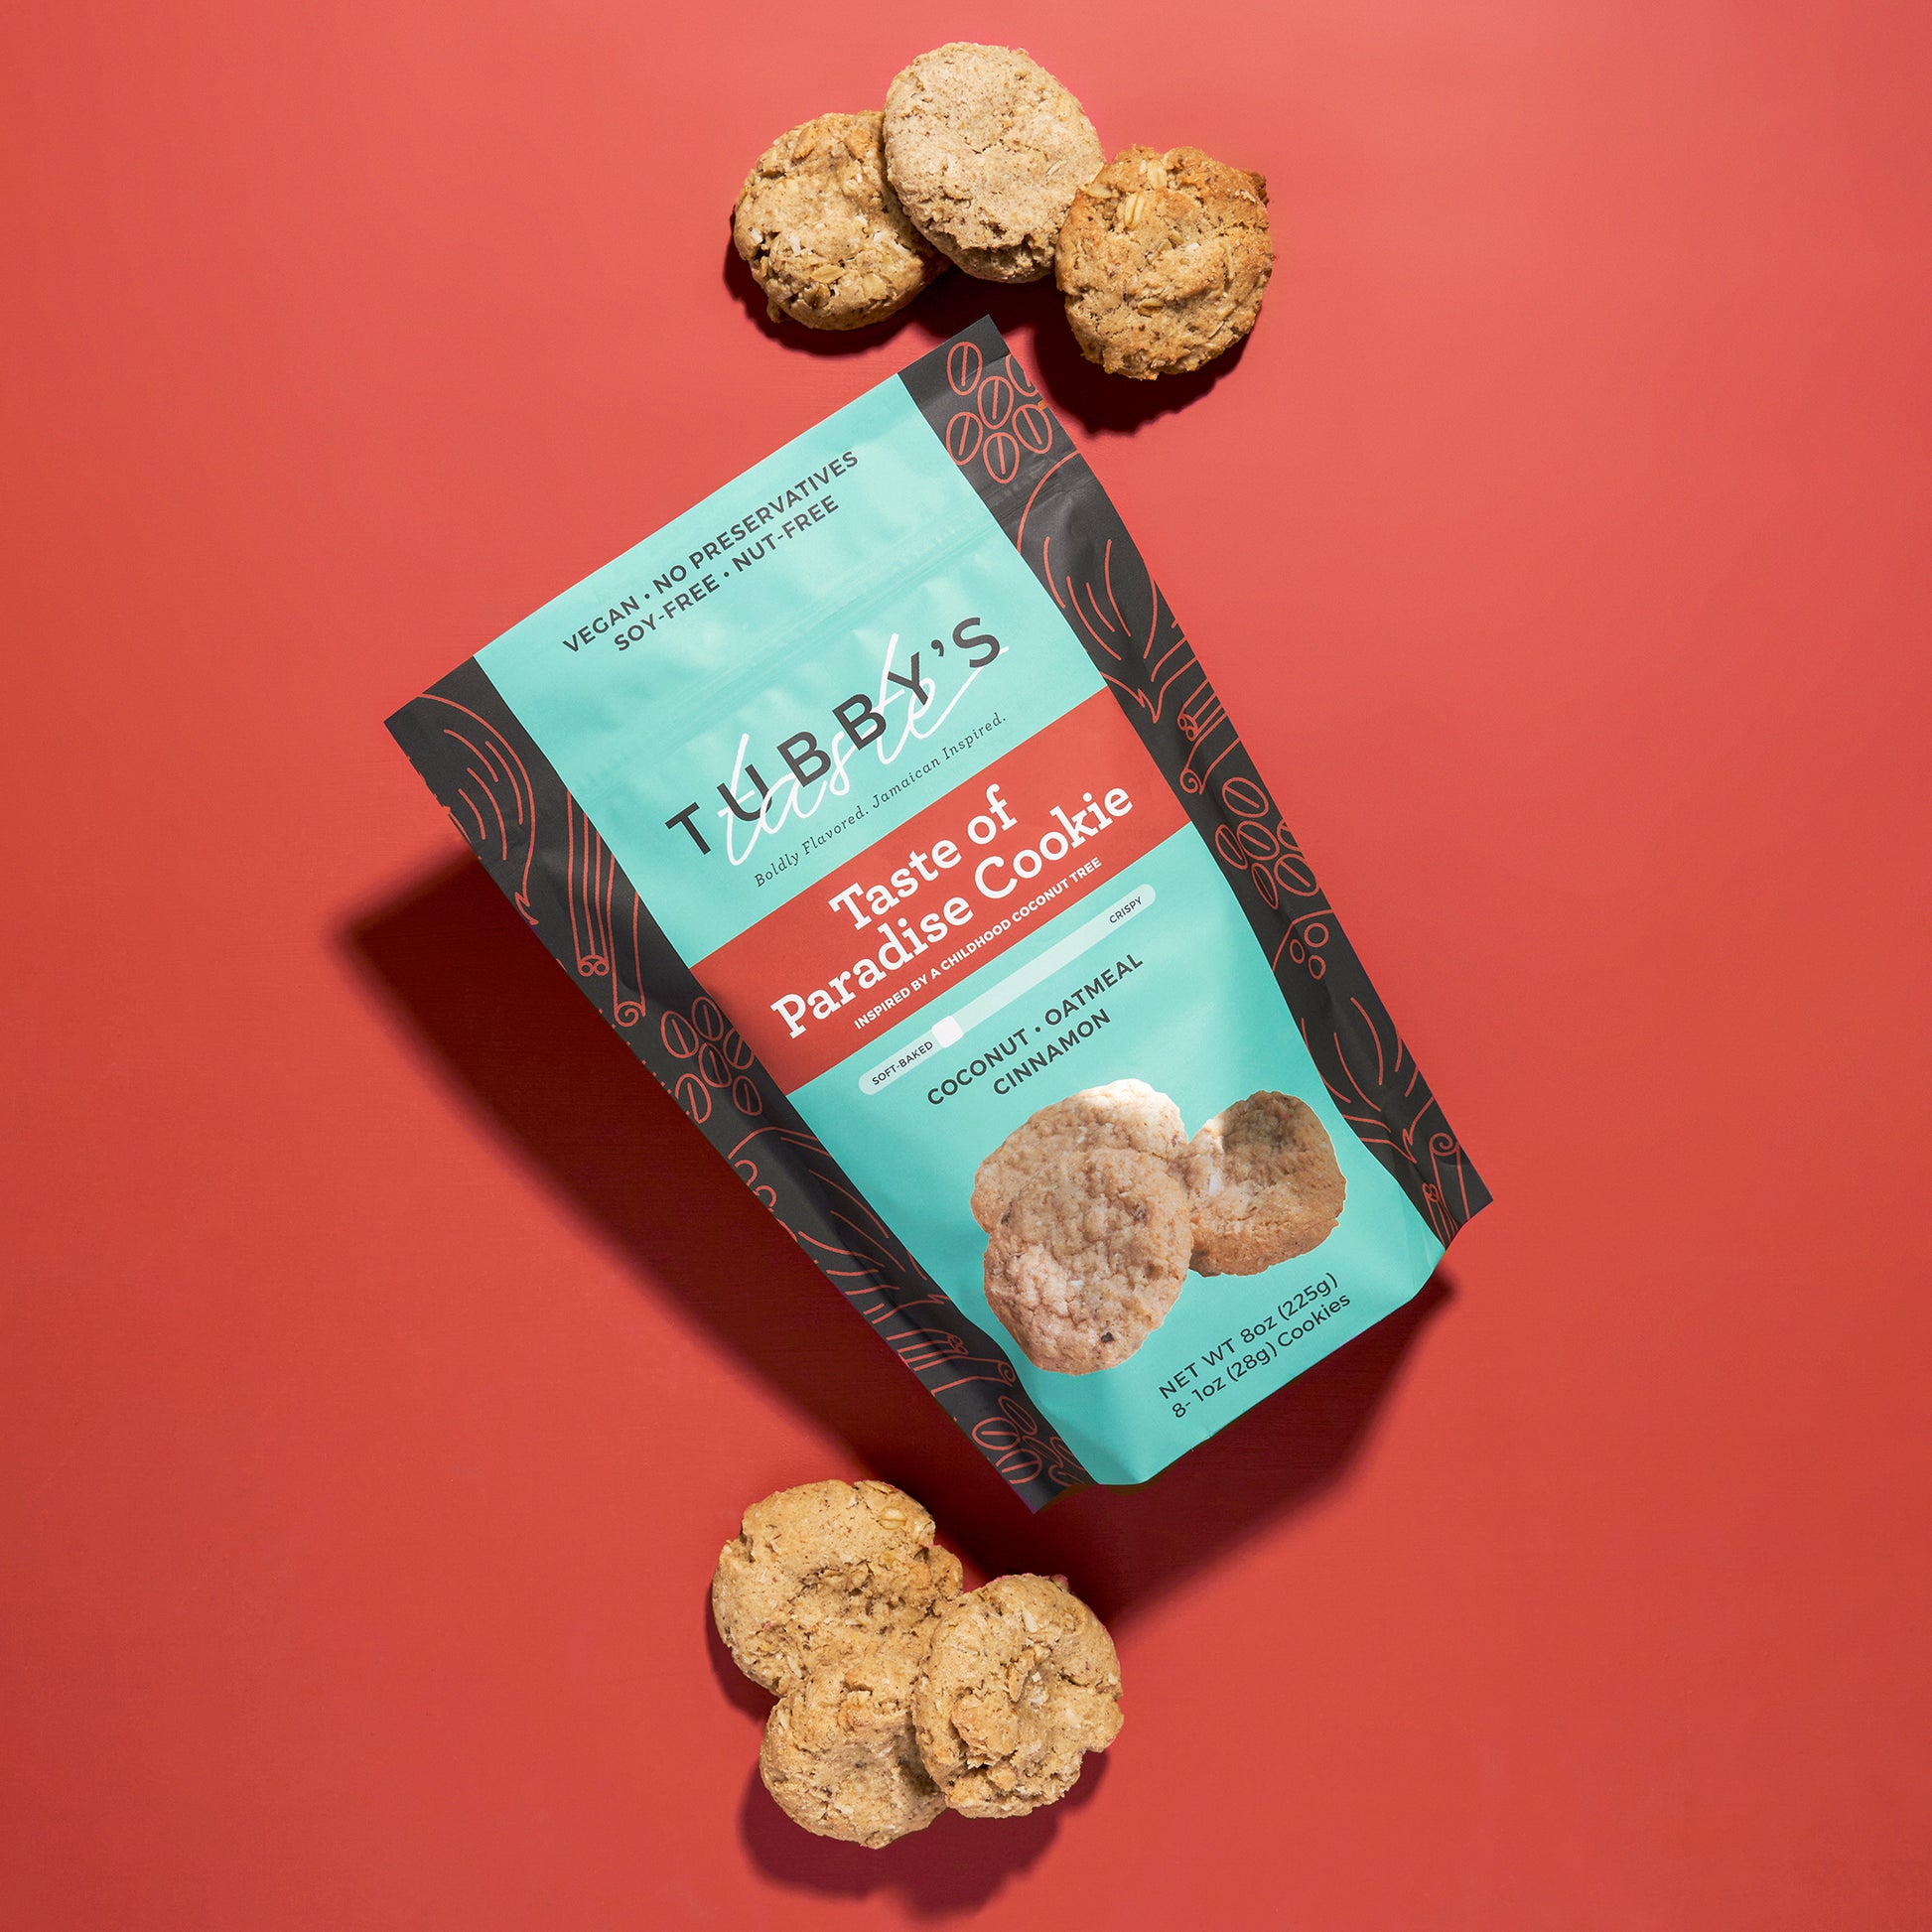 Six coconut oatmeal cinnamon cookies come out of a Tubby's Taste Taste of Paradise Cookie bag on a red background.